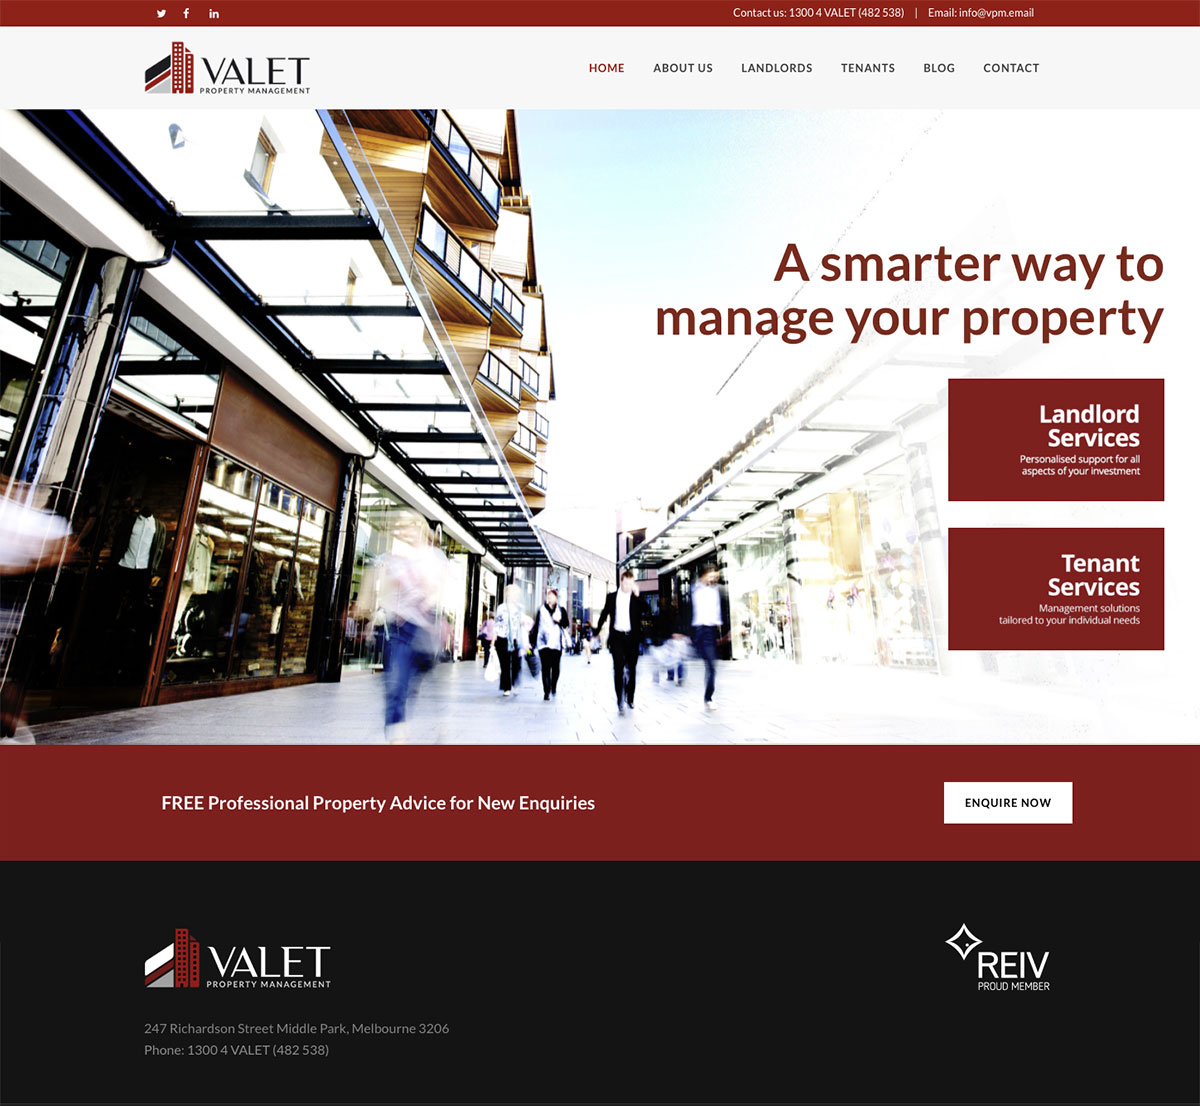 Valet Property Management Home Page